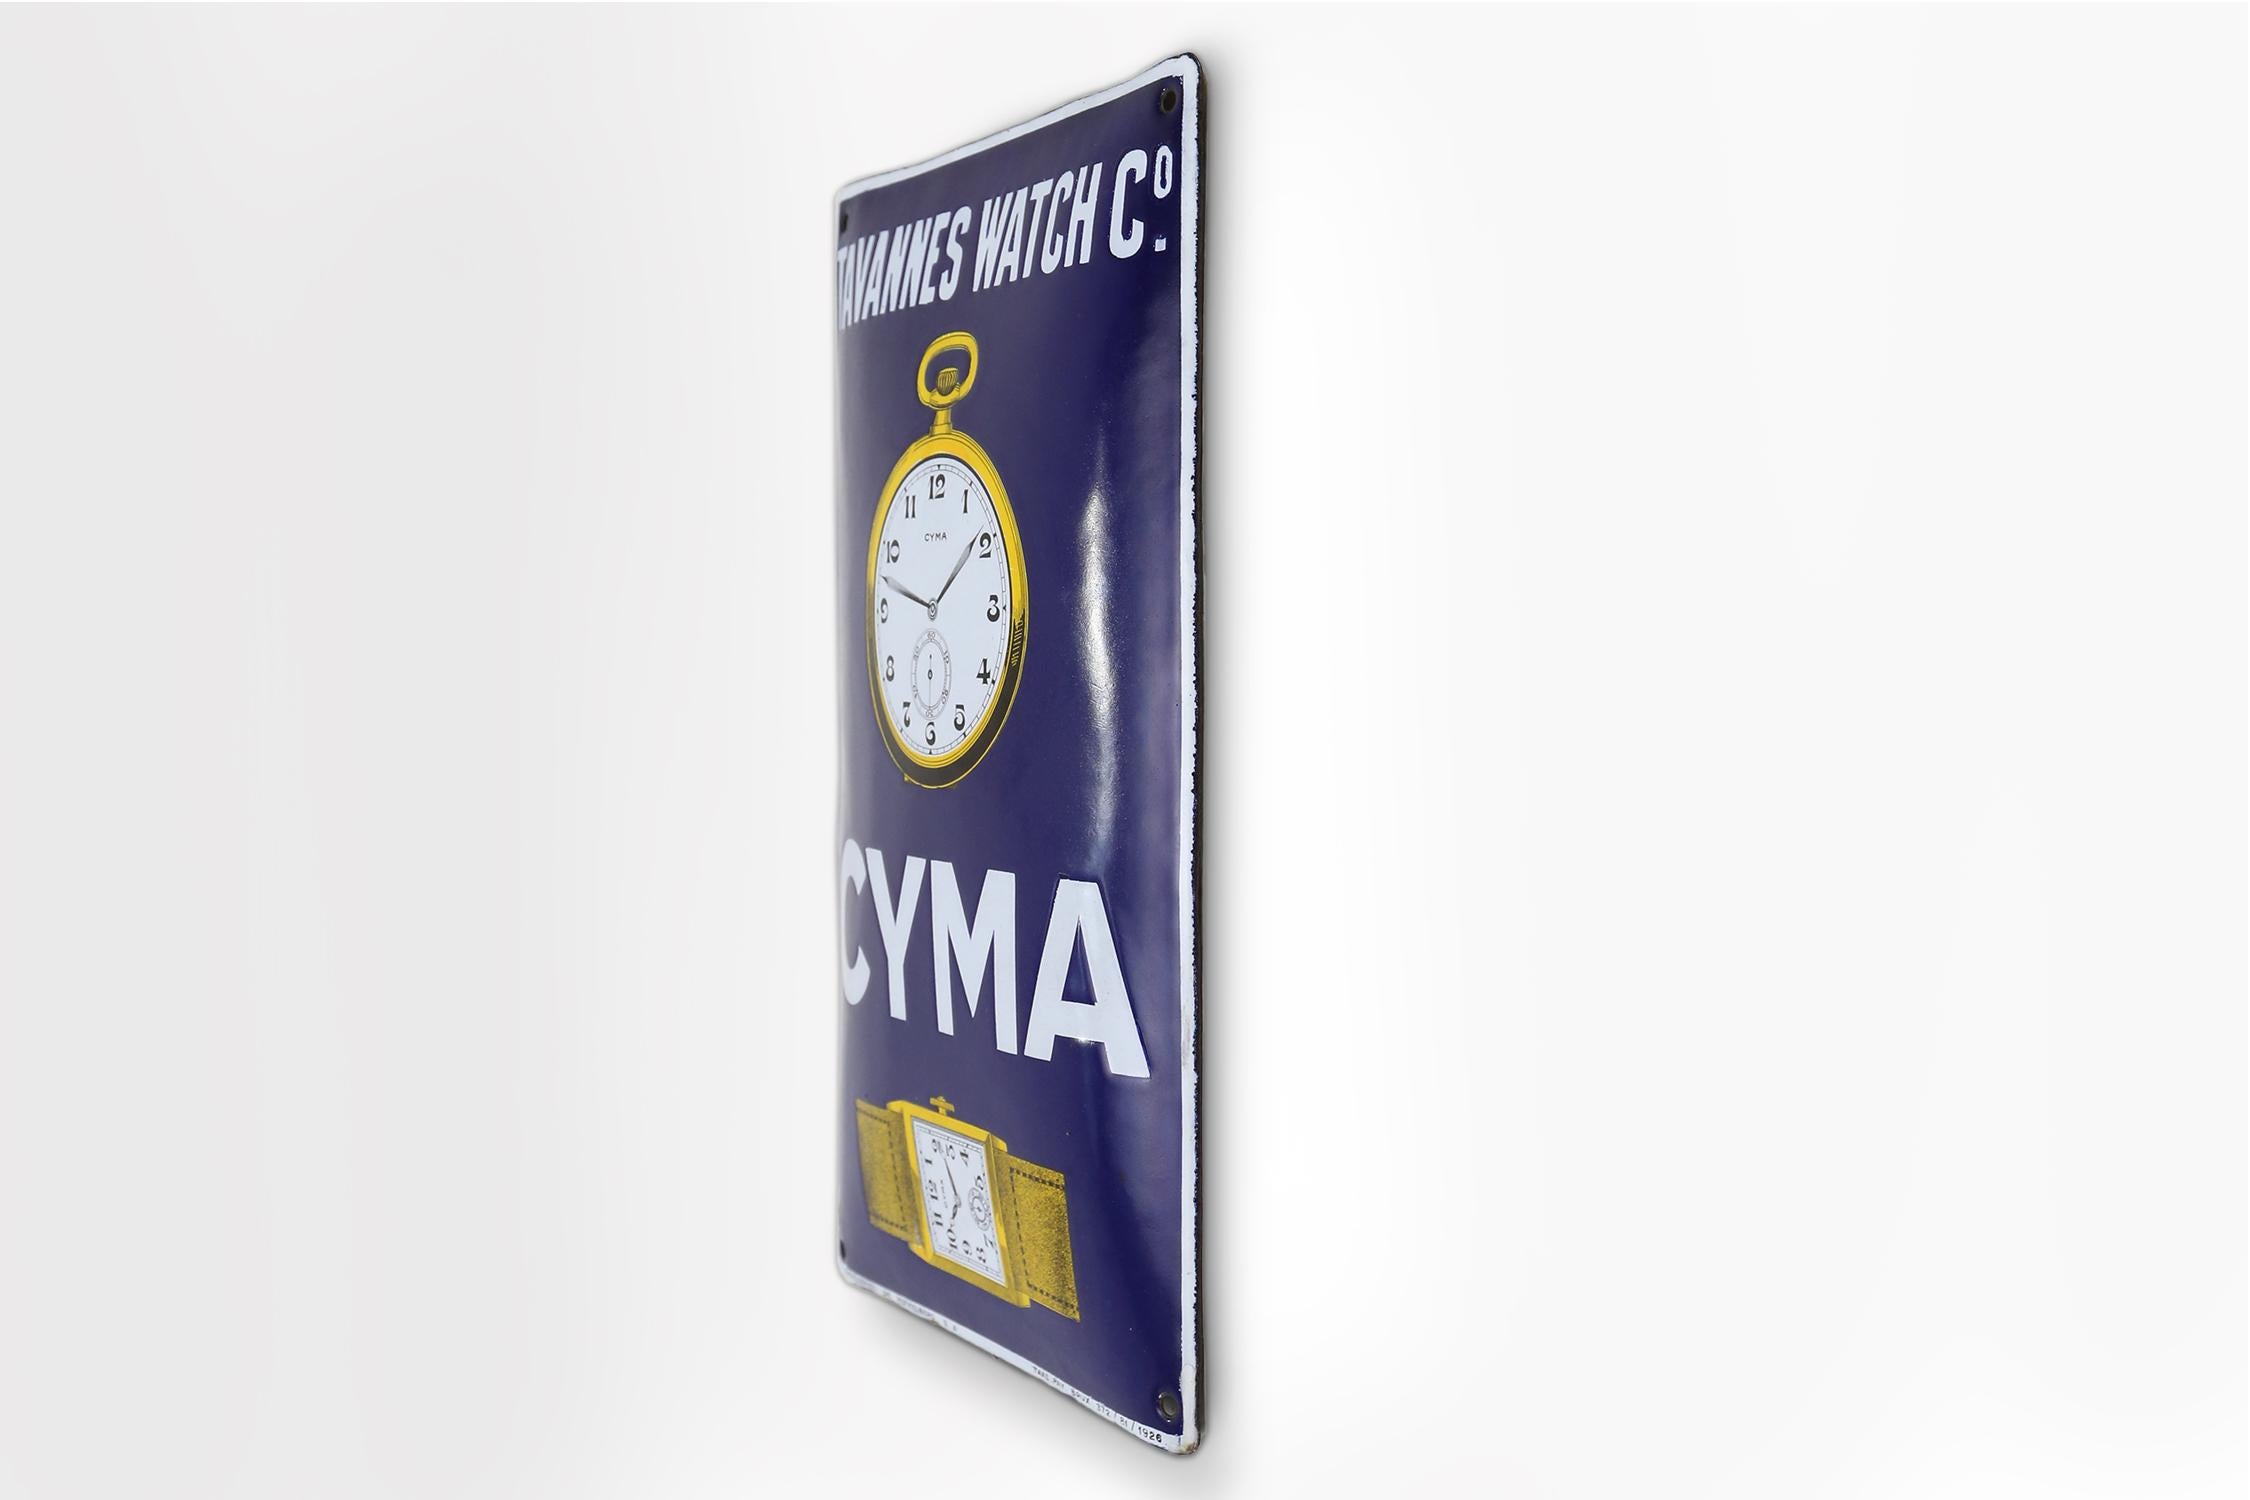 Cyma emanel advertising sign 1926 For Sale 1